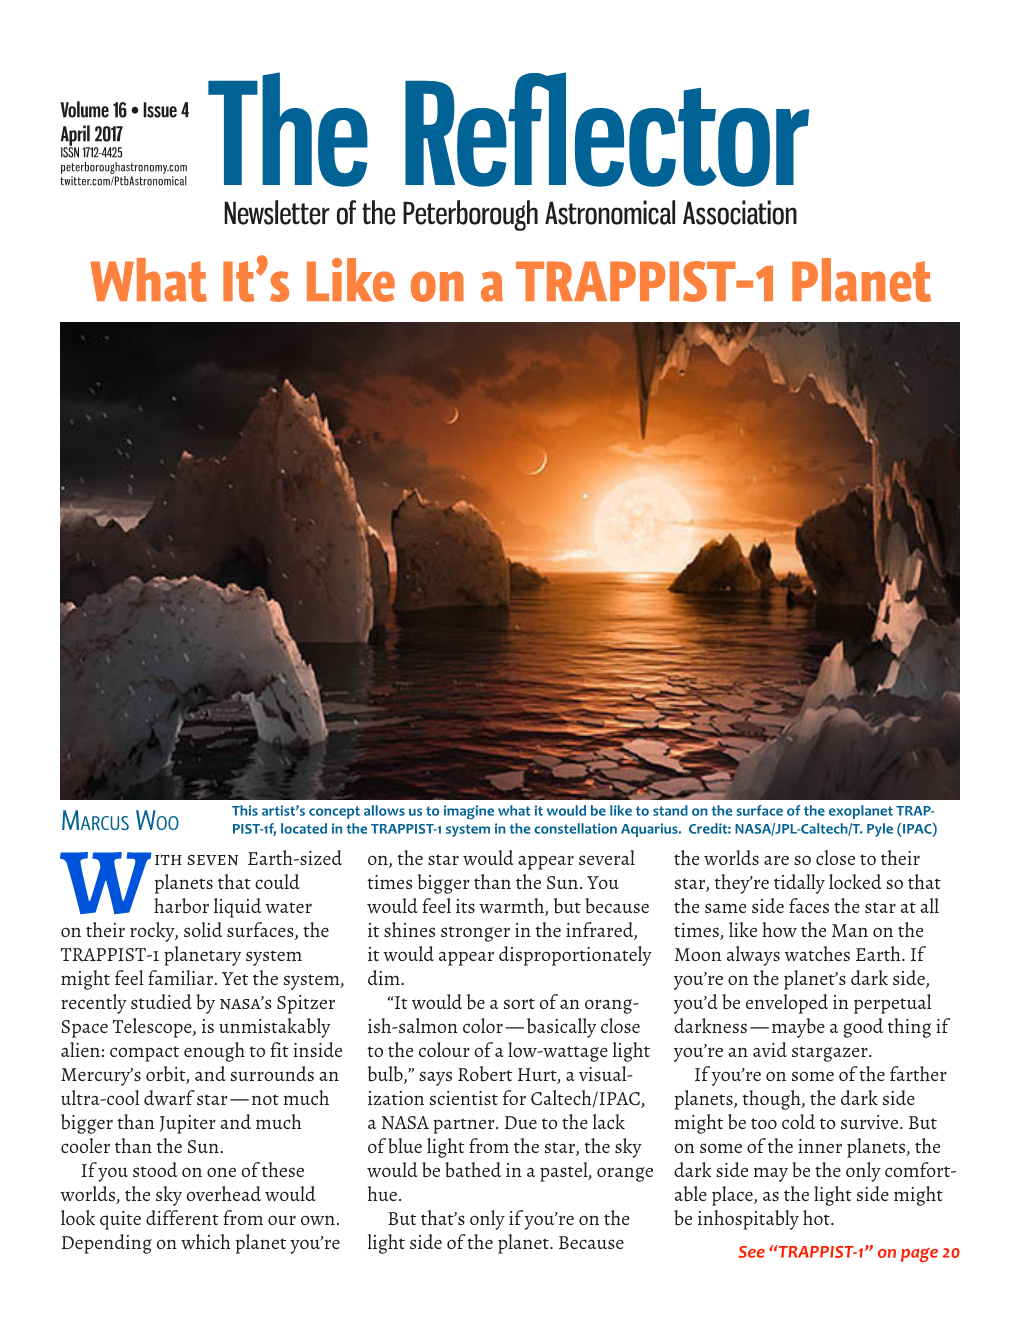 The Reflector Newsletter of the Peterborough Astronomical Association What It’S Like on a TRAPPIST-1 Planet